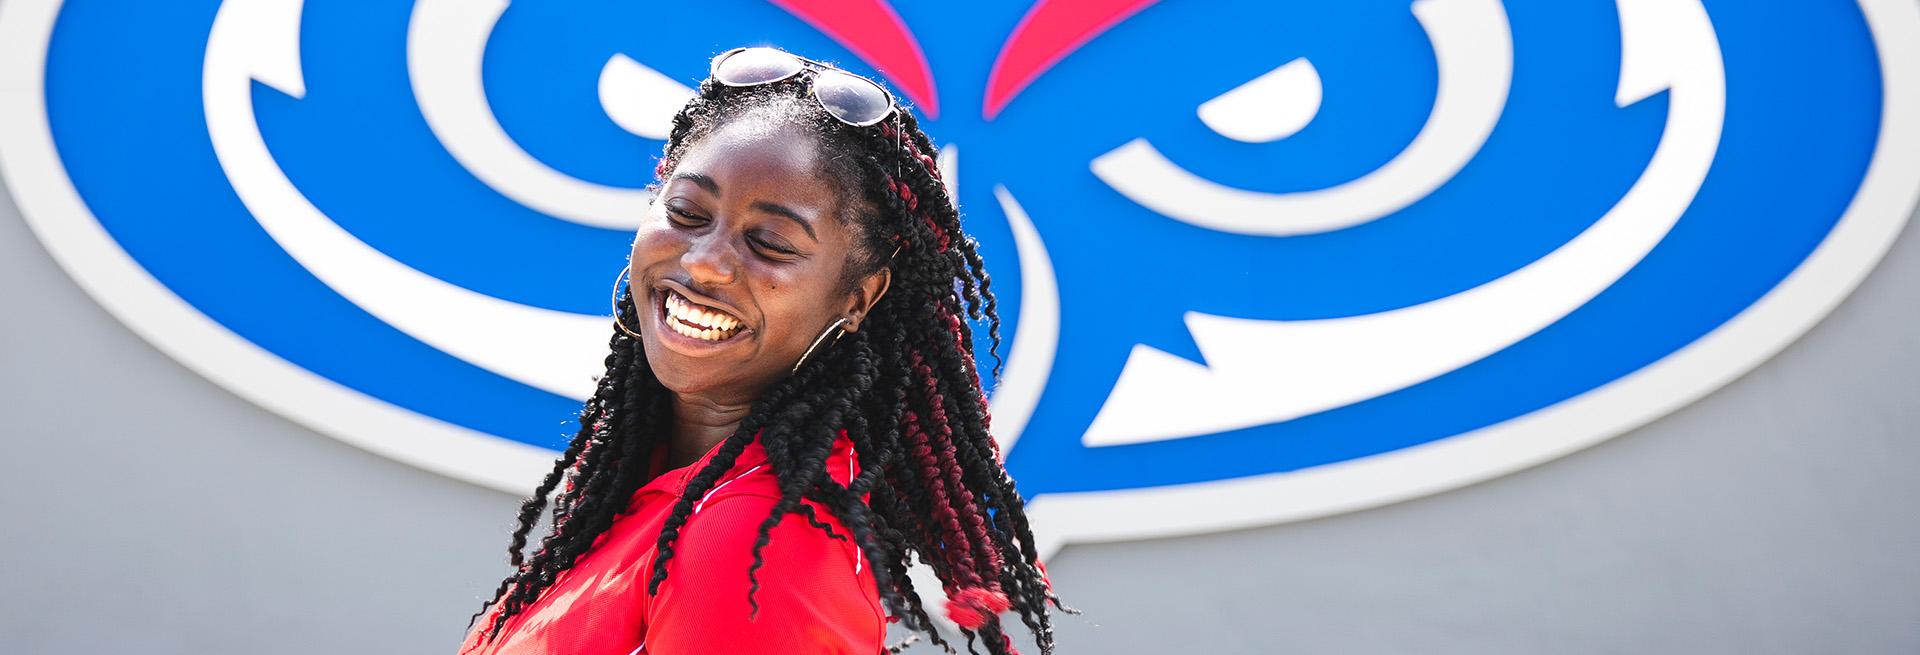 Student smiling infront of FAU Owl head logo sign